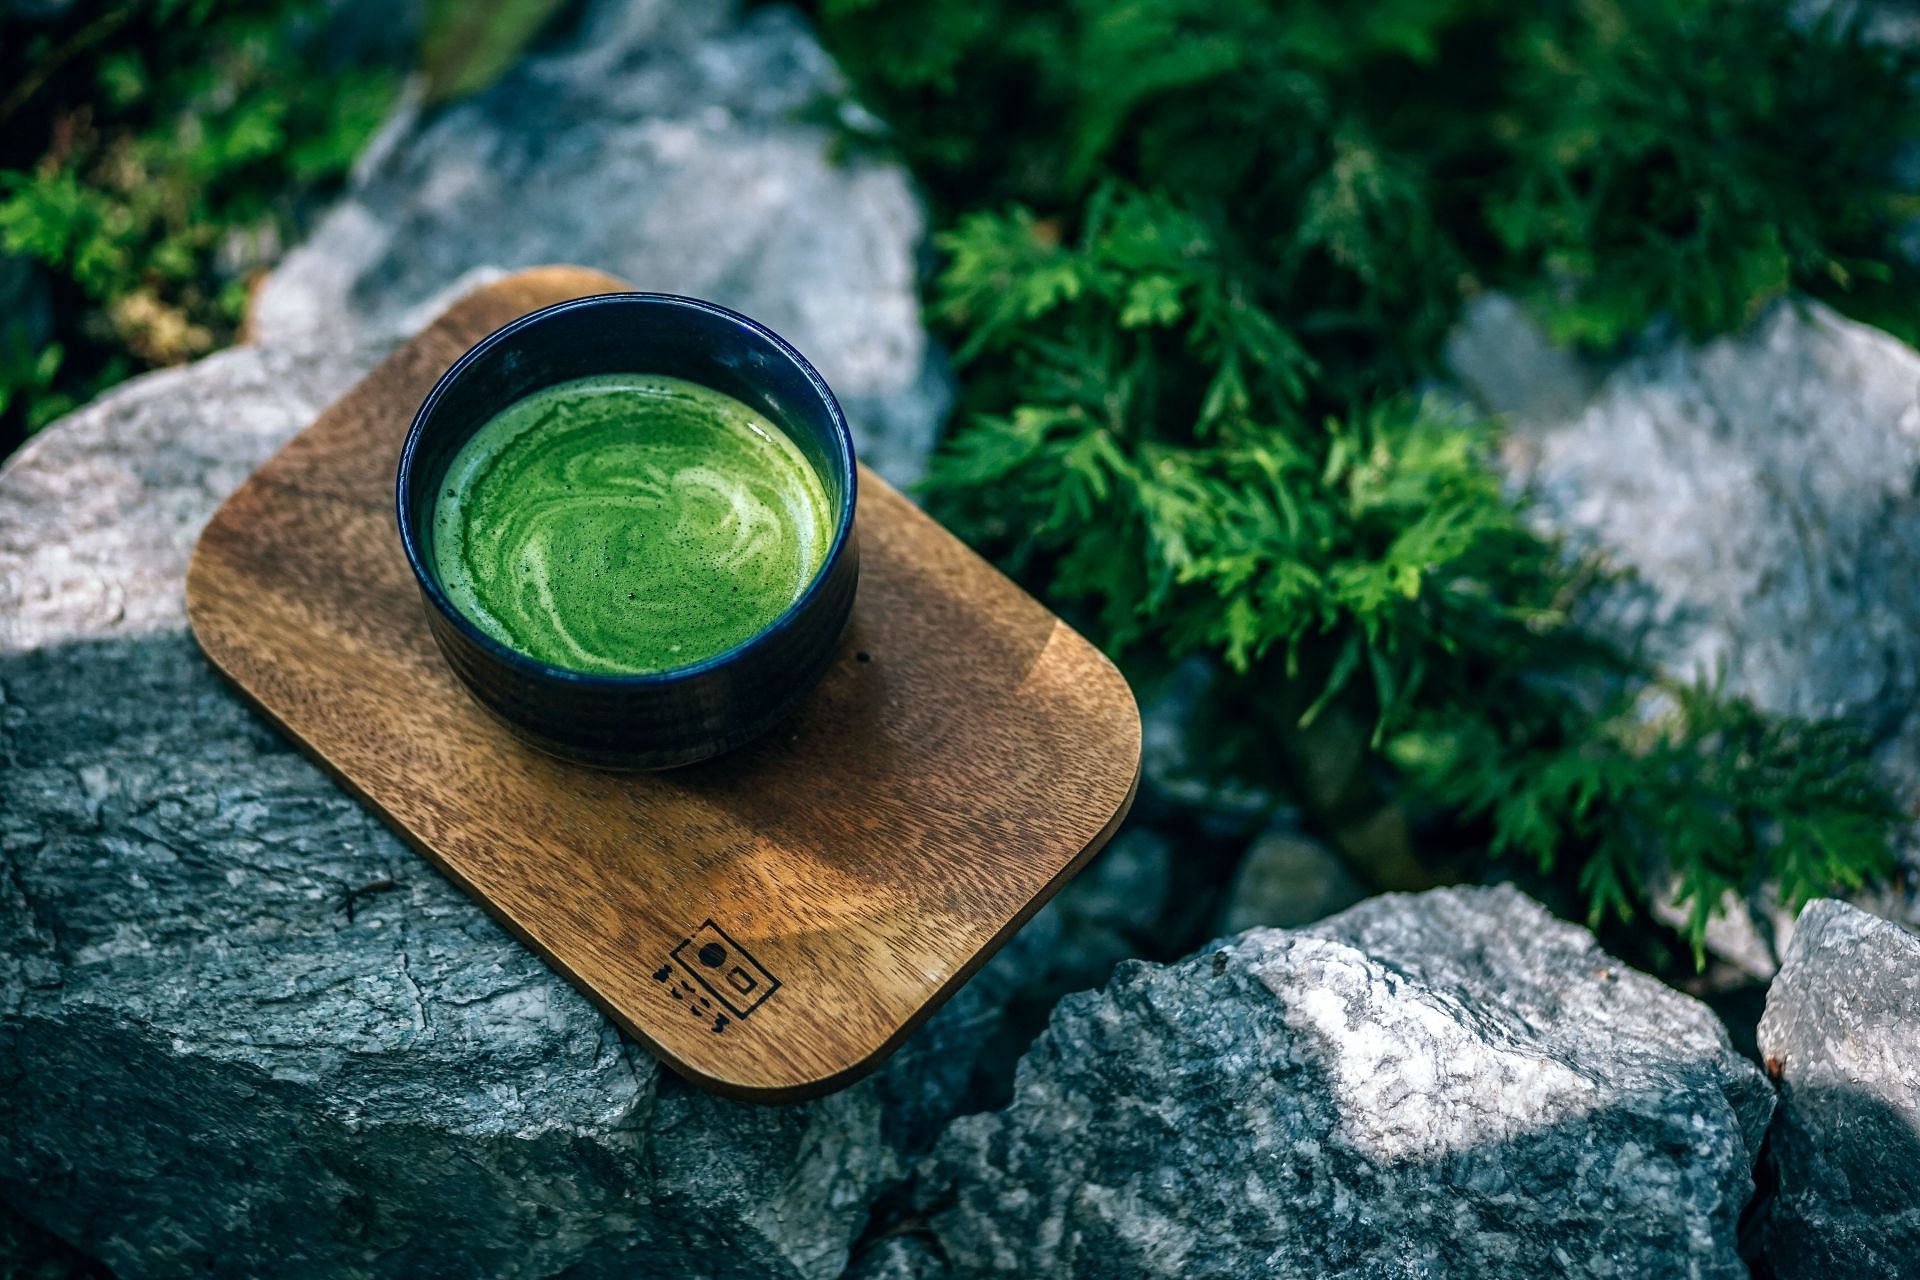 Green tea can help reduce inflammation in the body. (Image via Pexels / Nipanan Lifestyle.com)